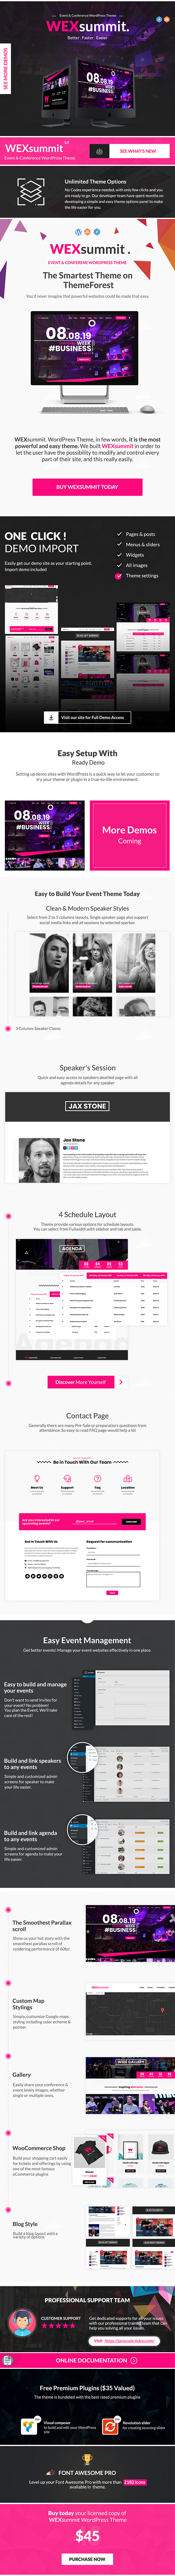 WEXsummit - Events and Conference WordPress Theme - 2